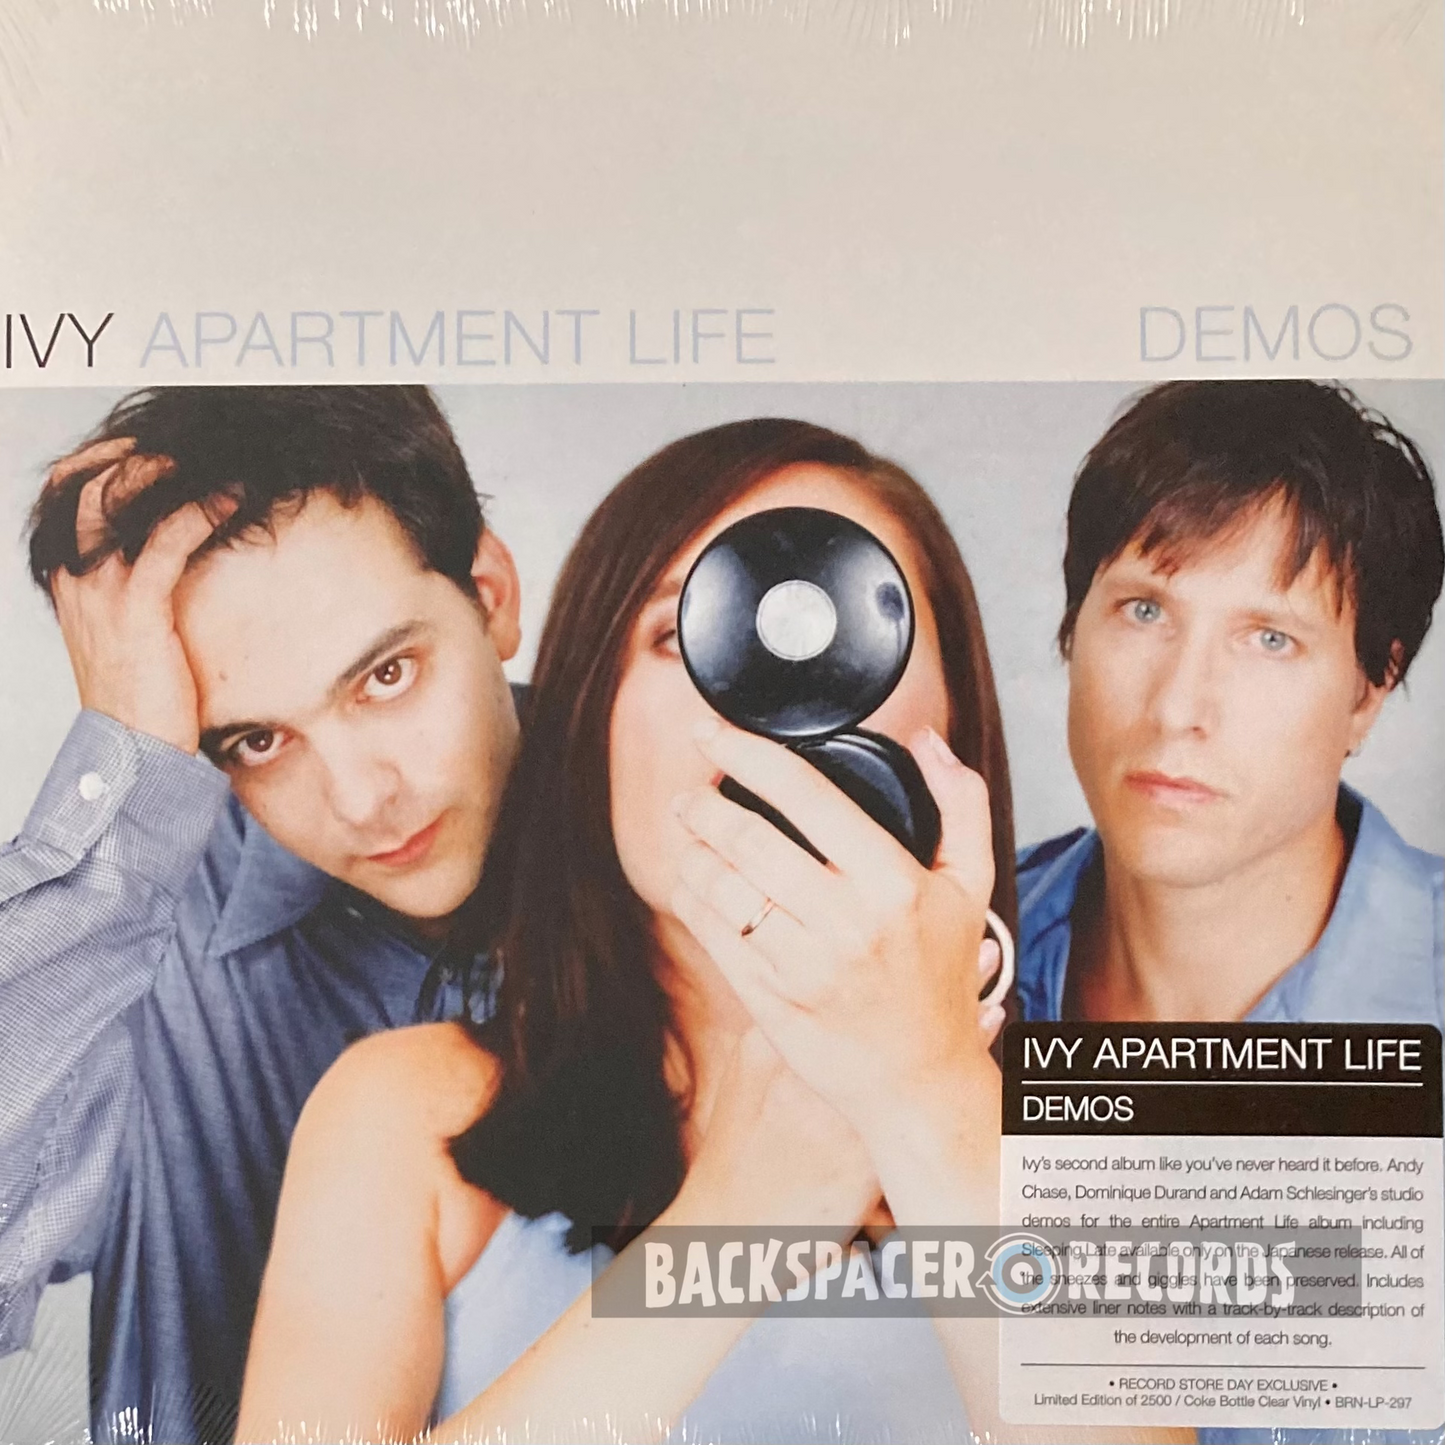 Ivy – Apartment Life Demos (Limited Edition) LP (Sealed)